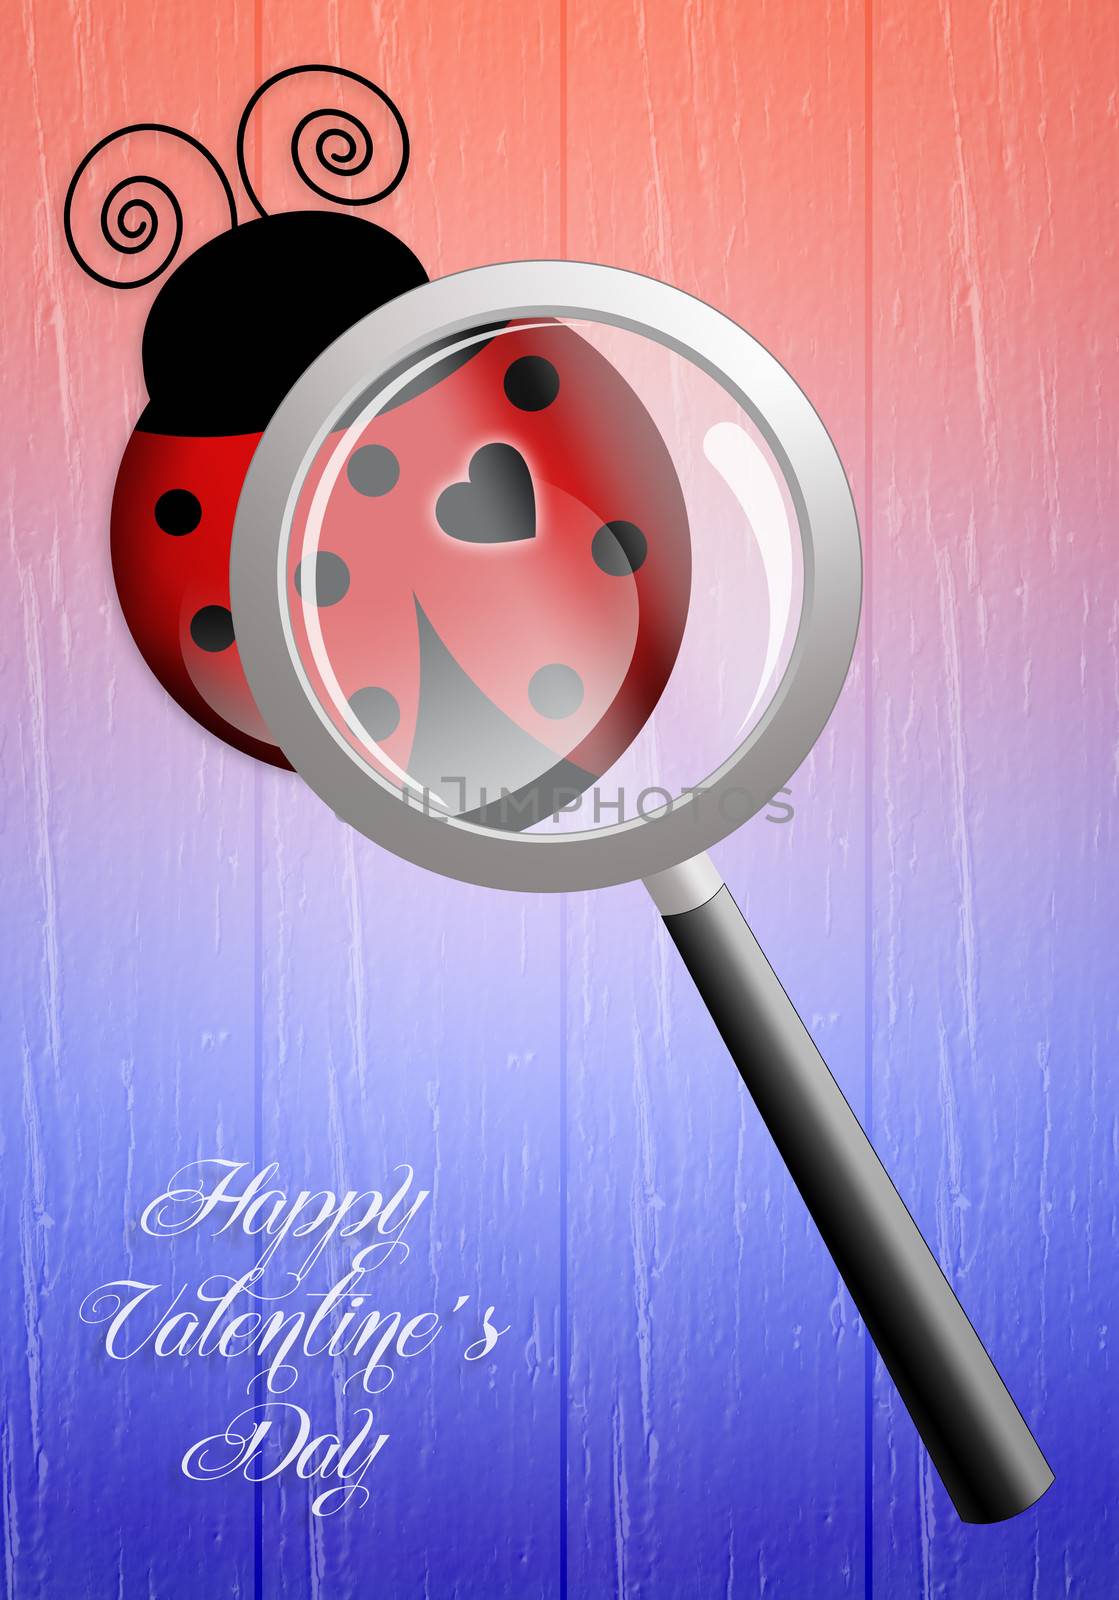 Ladybug with heart by sognolucido